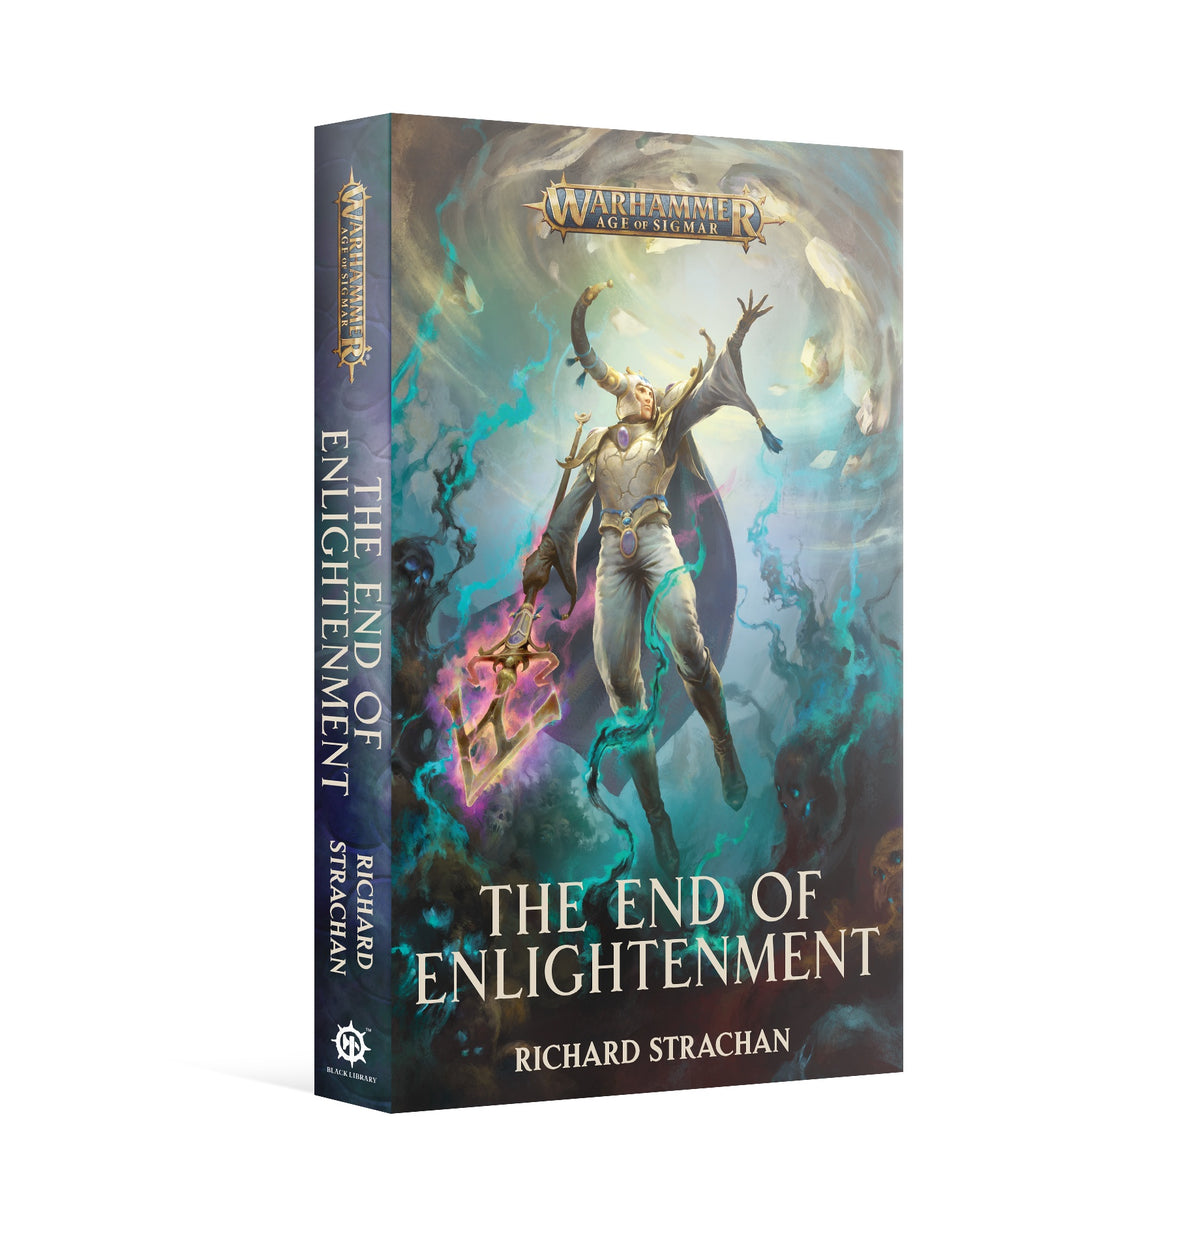 The End of Enlightenment (Novel PB)